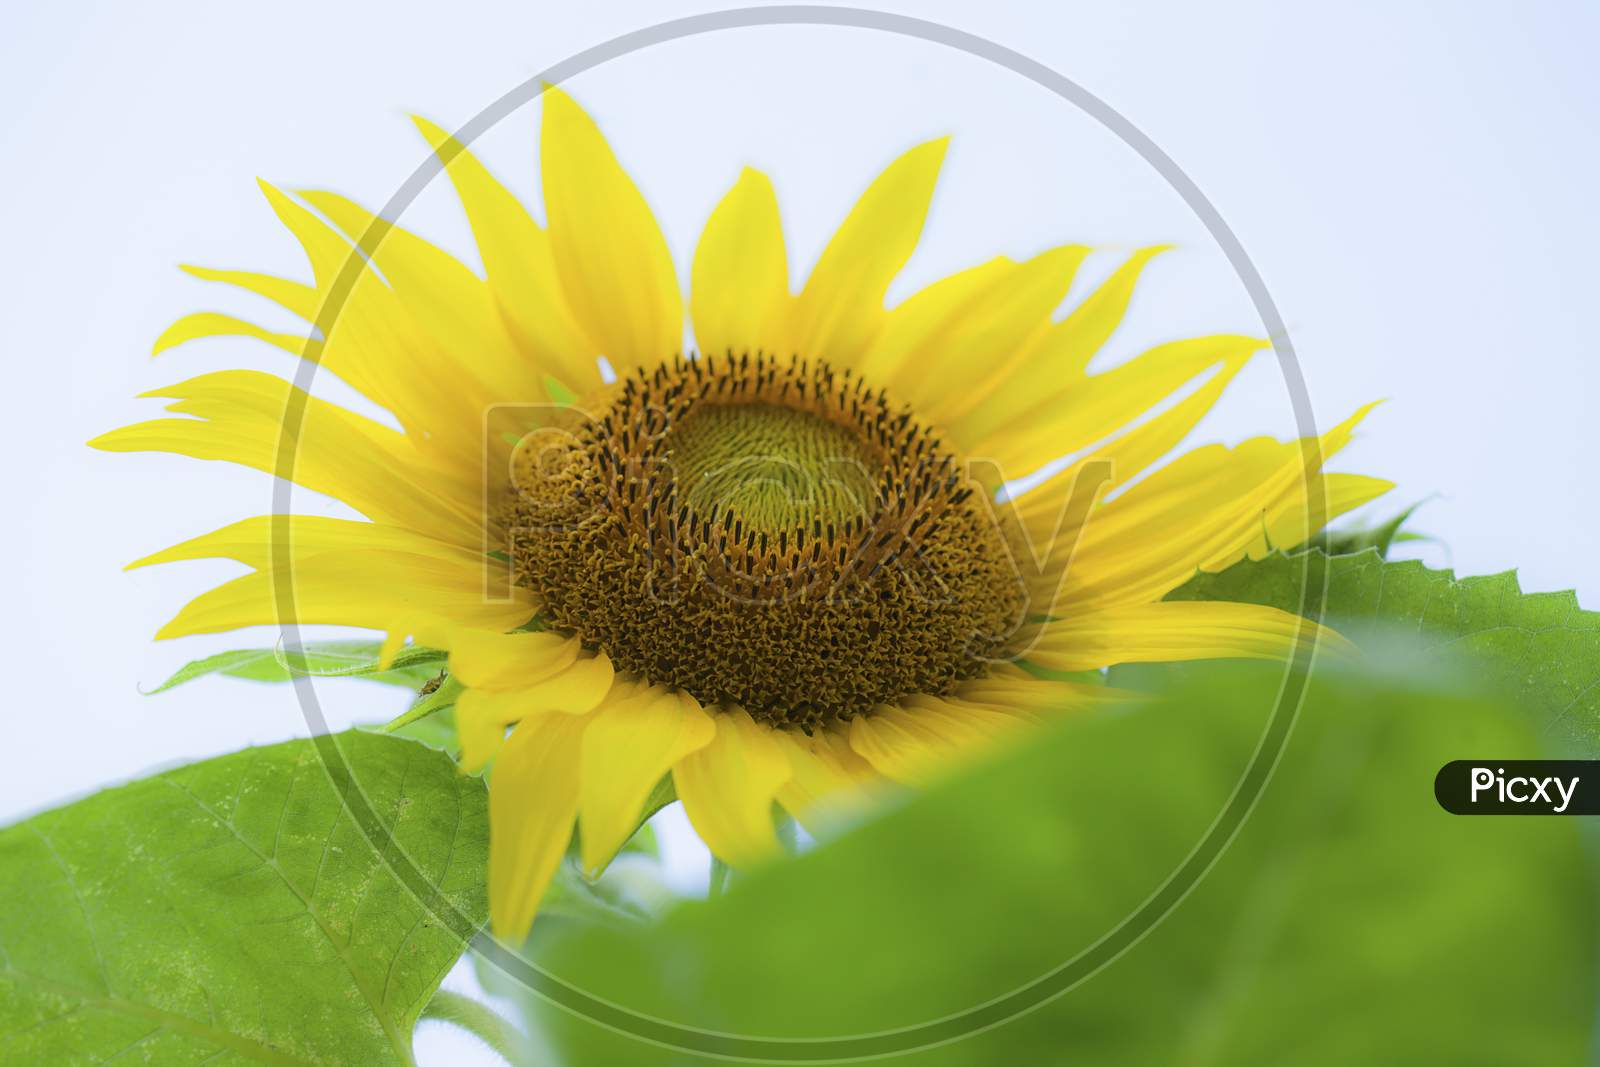 Sunflower Flower With Green Leaves